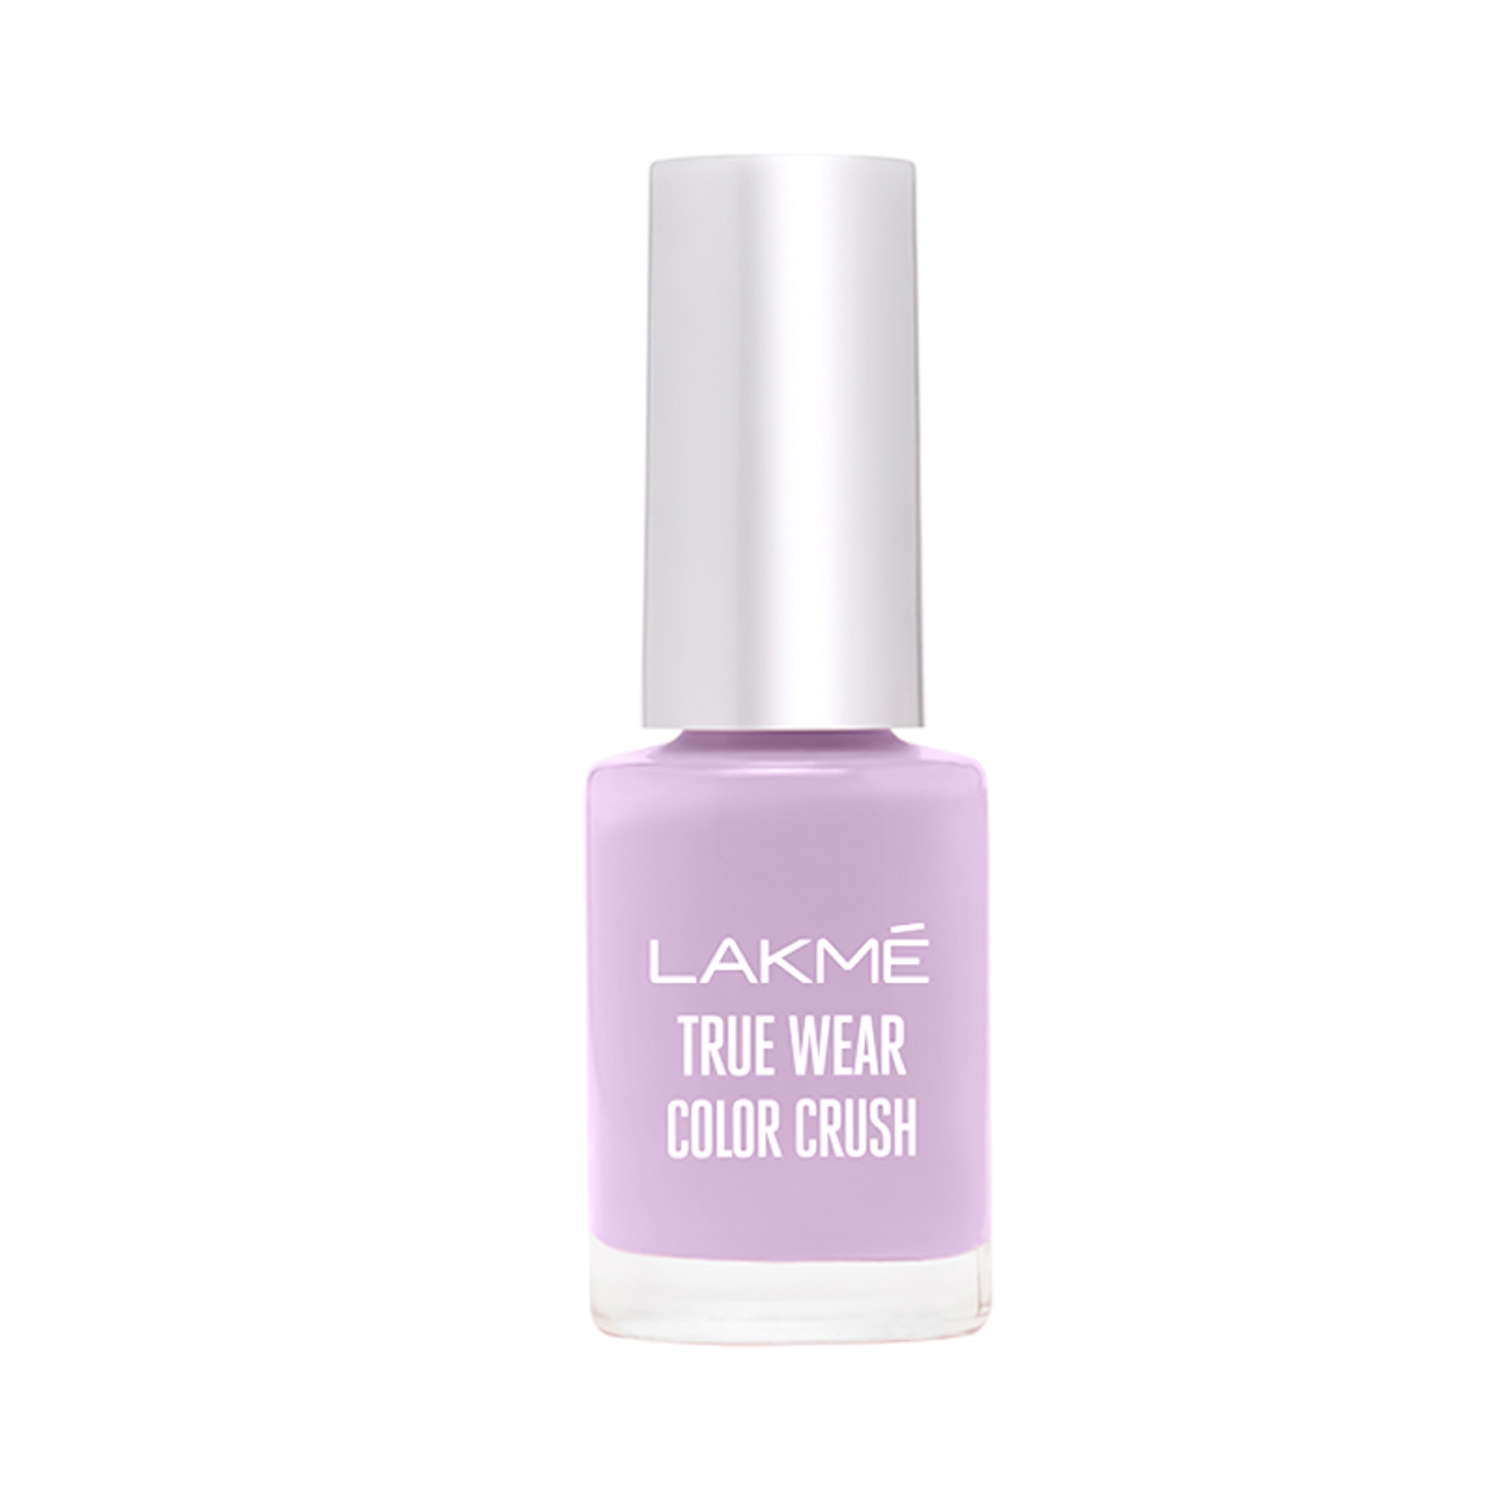 Buy Lakme True Wear Nail Color Online at Best Price of Rs 130 - bigbasket